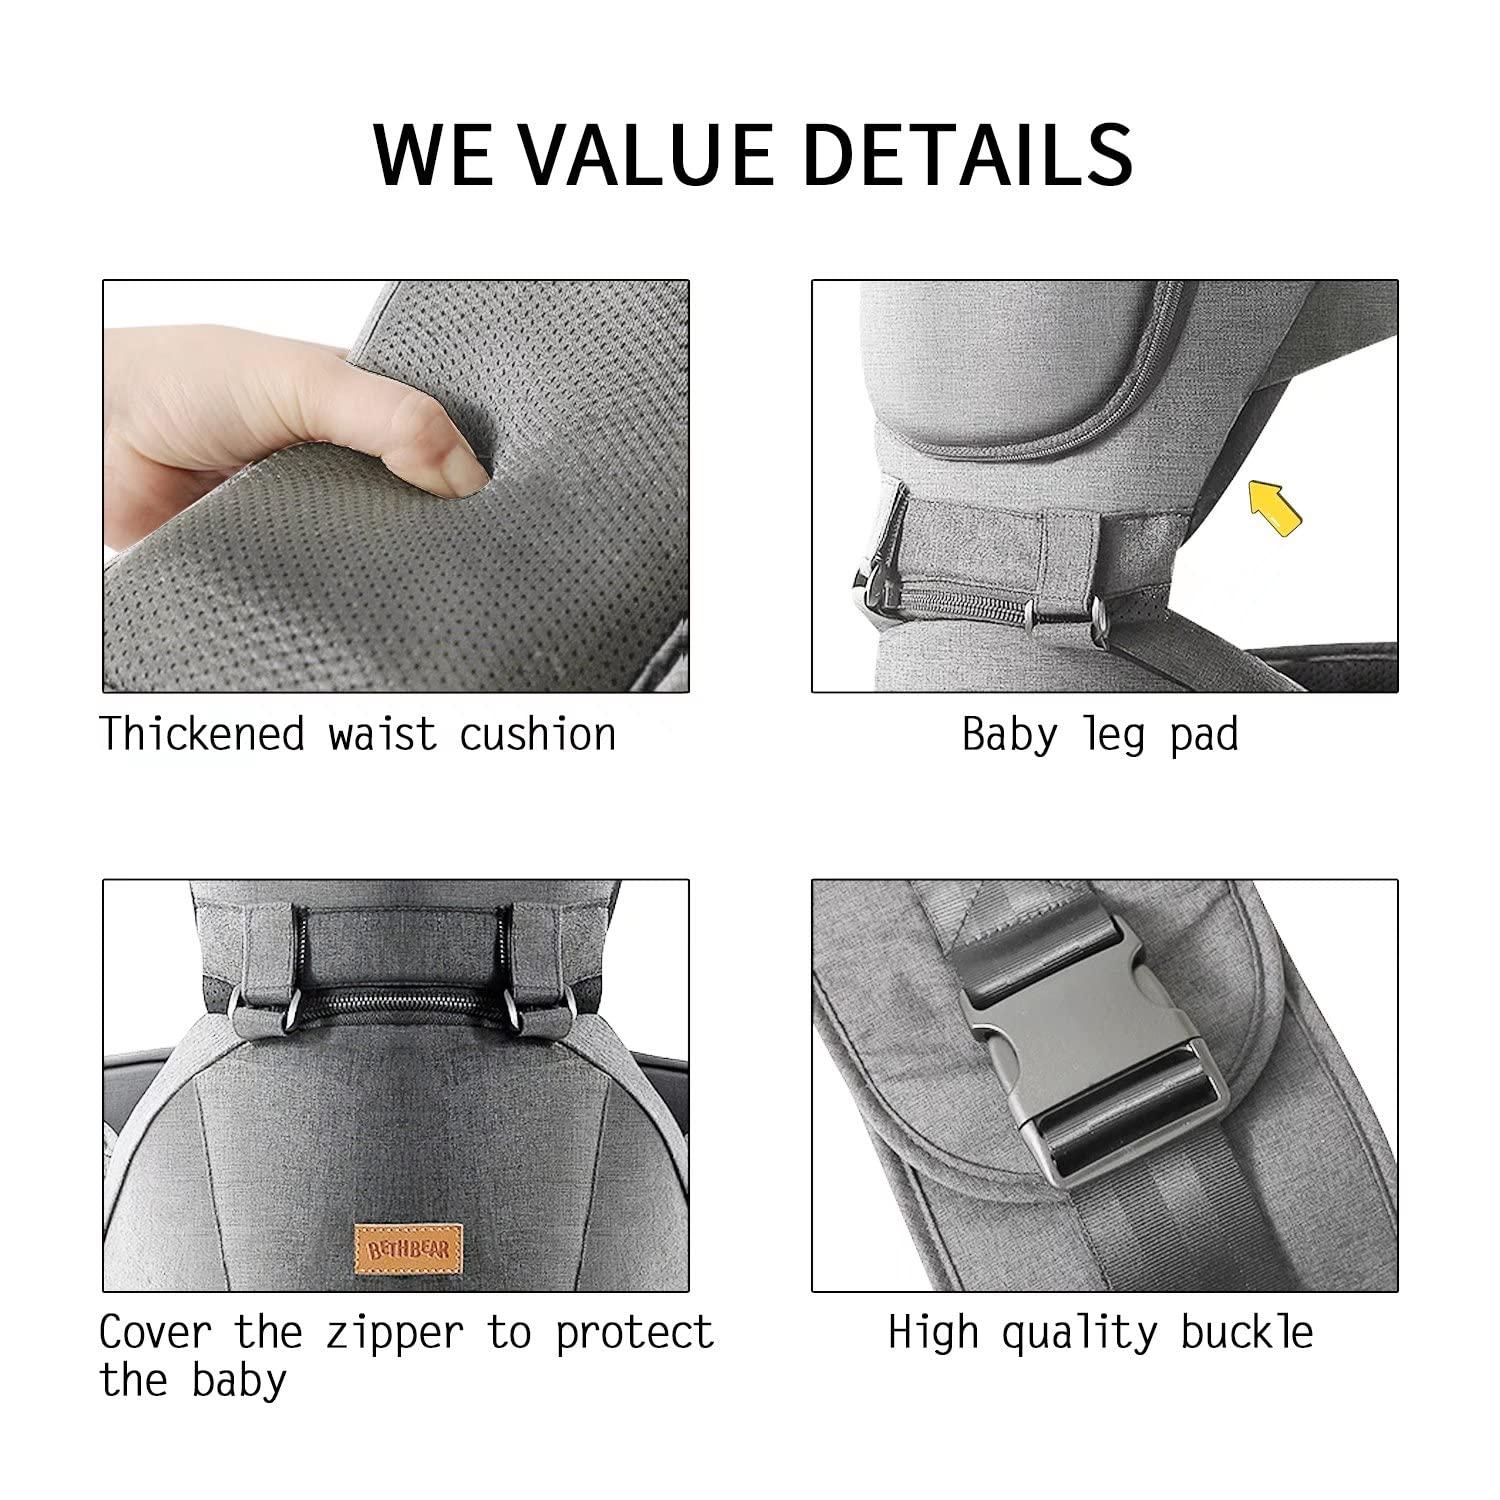 Multi-purpose comfort cushion - Products and accessories for baby